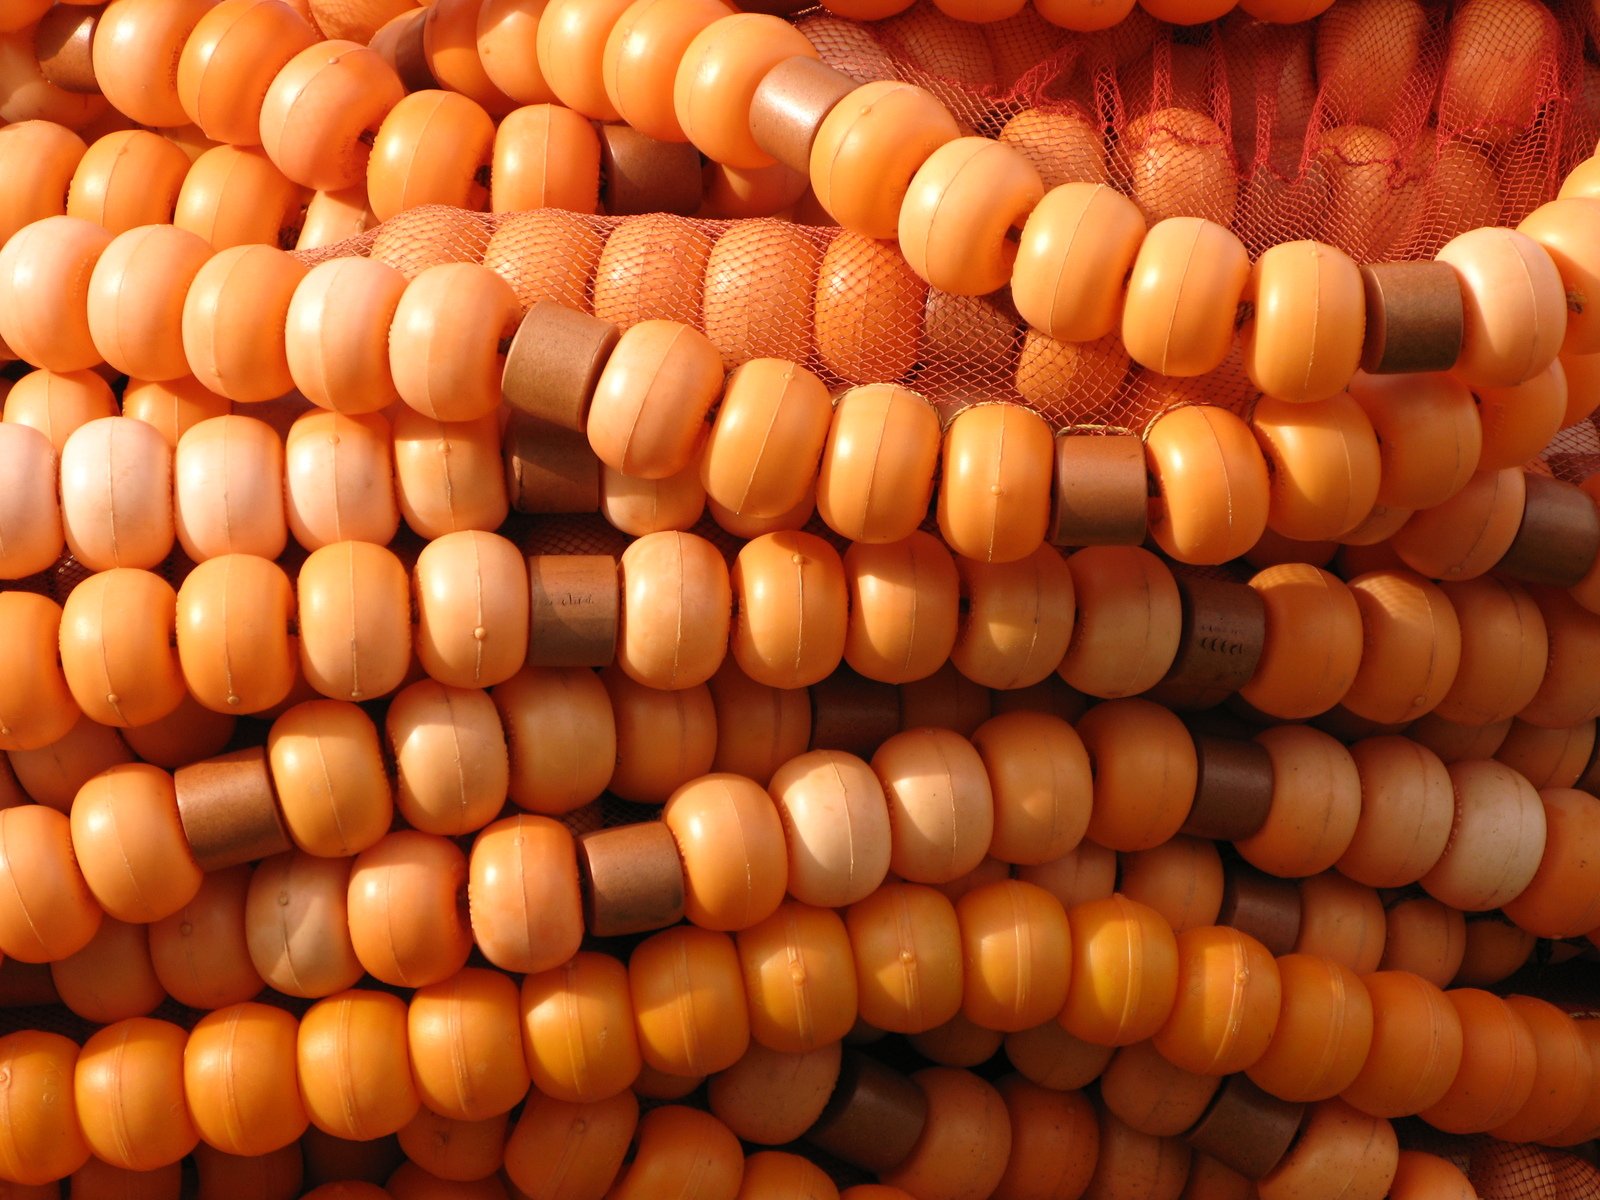 several rows of orange carrots laying together